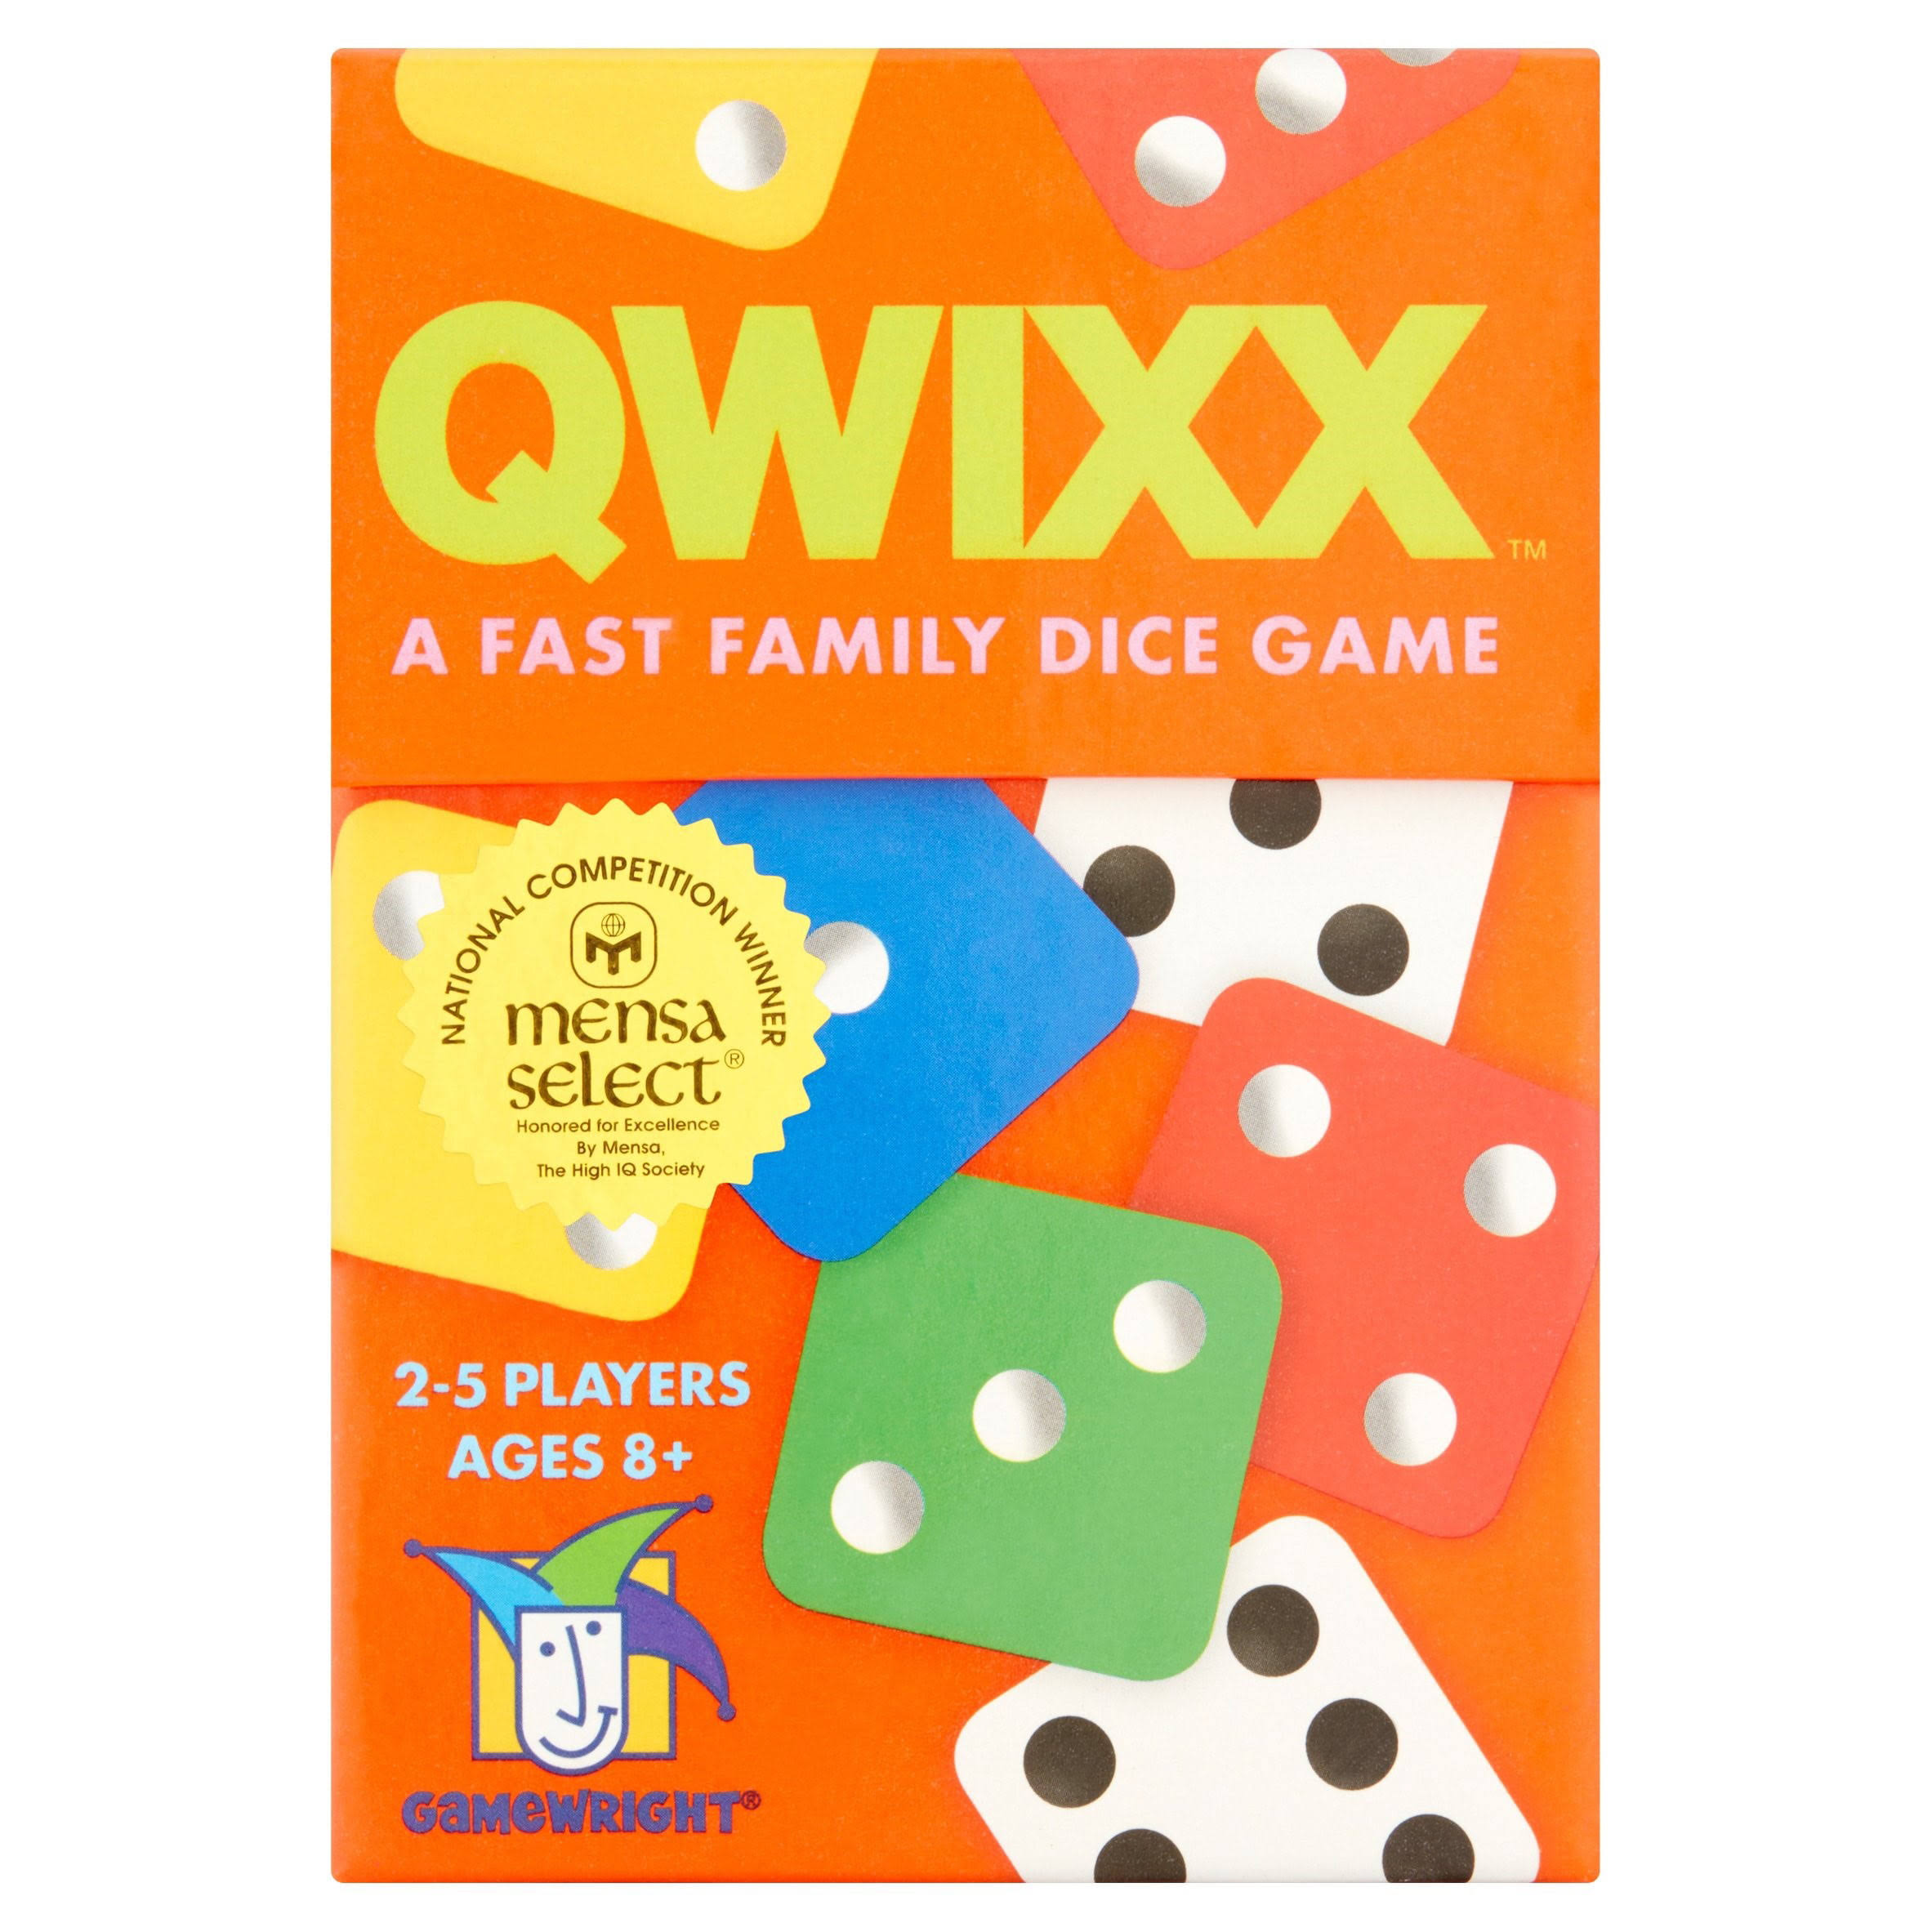 Gamewright Qwixx A Fast Family Dice Game